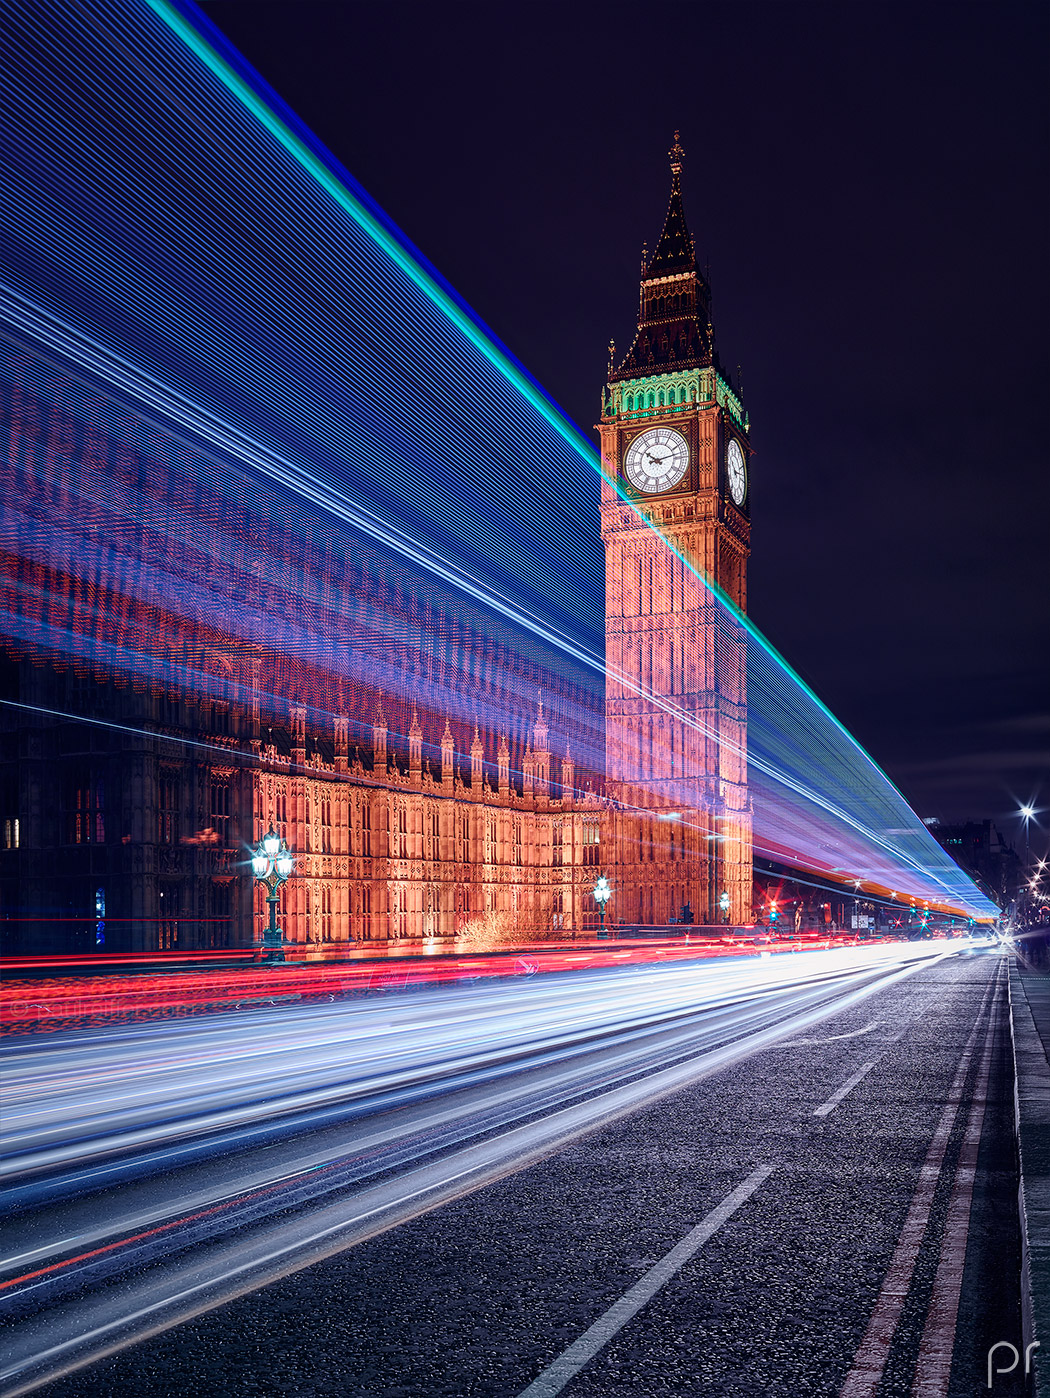 London In Blue Paul Reiffer Professional Landscape Cityscape Photographer Palace Westminster Big Ben Clock Night Tower Traffic Trails Light Cars Houses Parliament